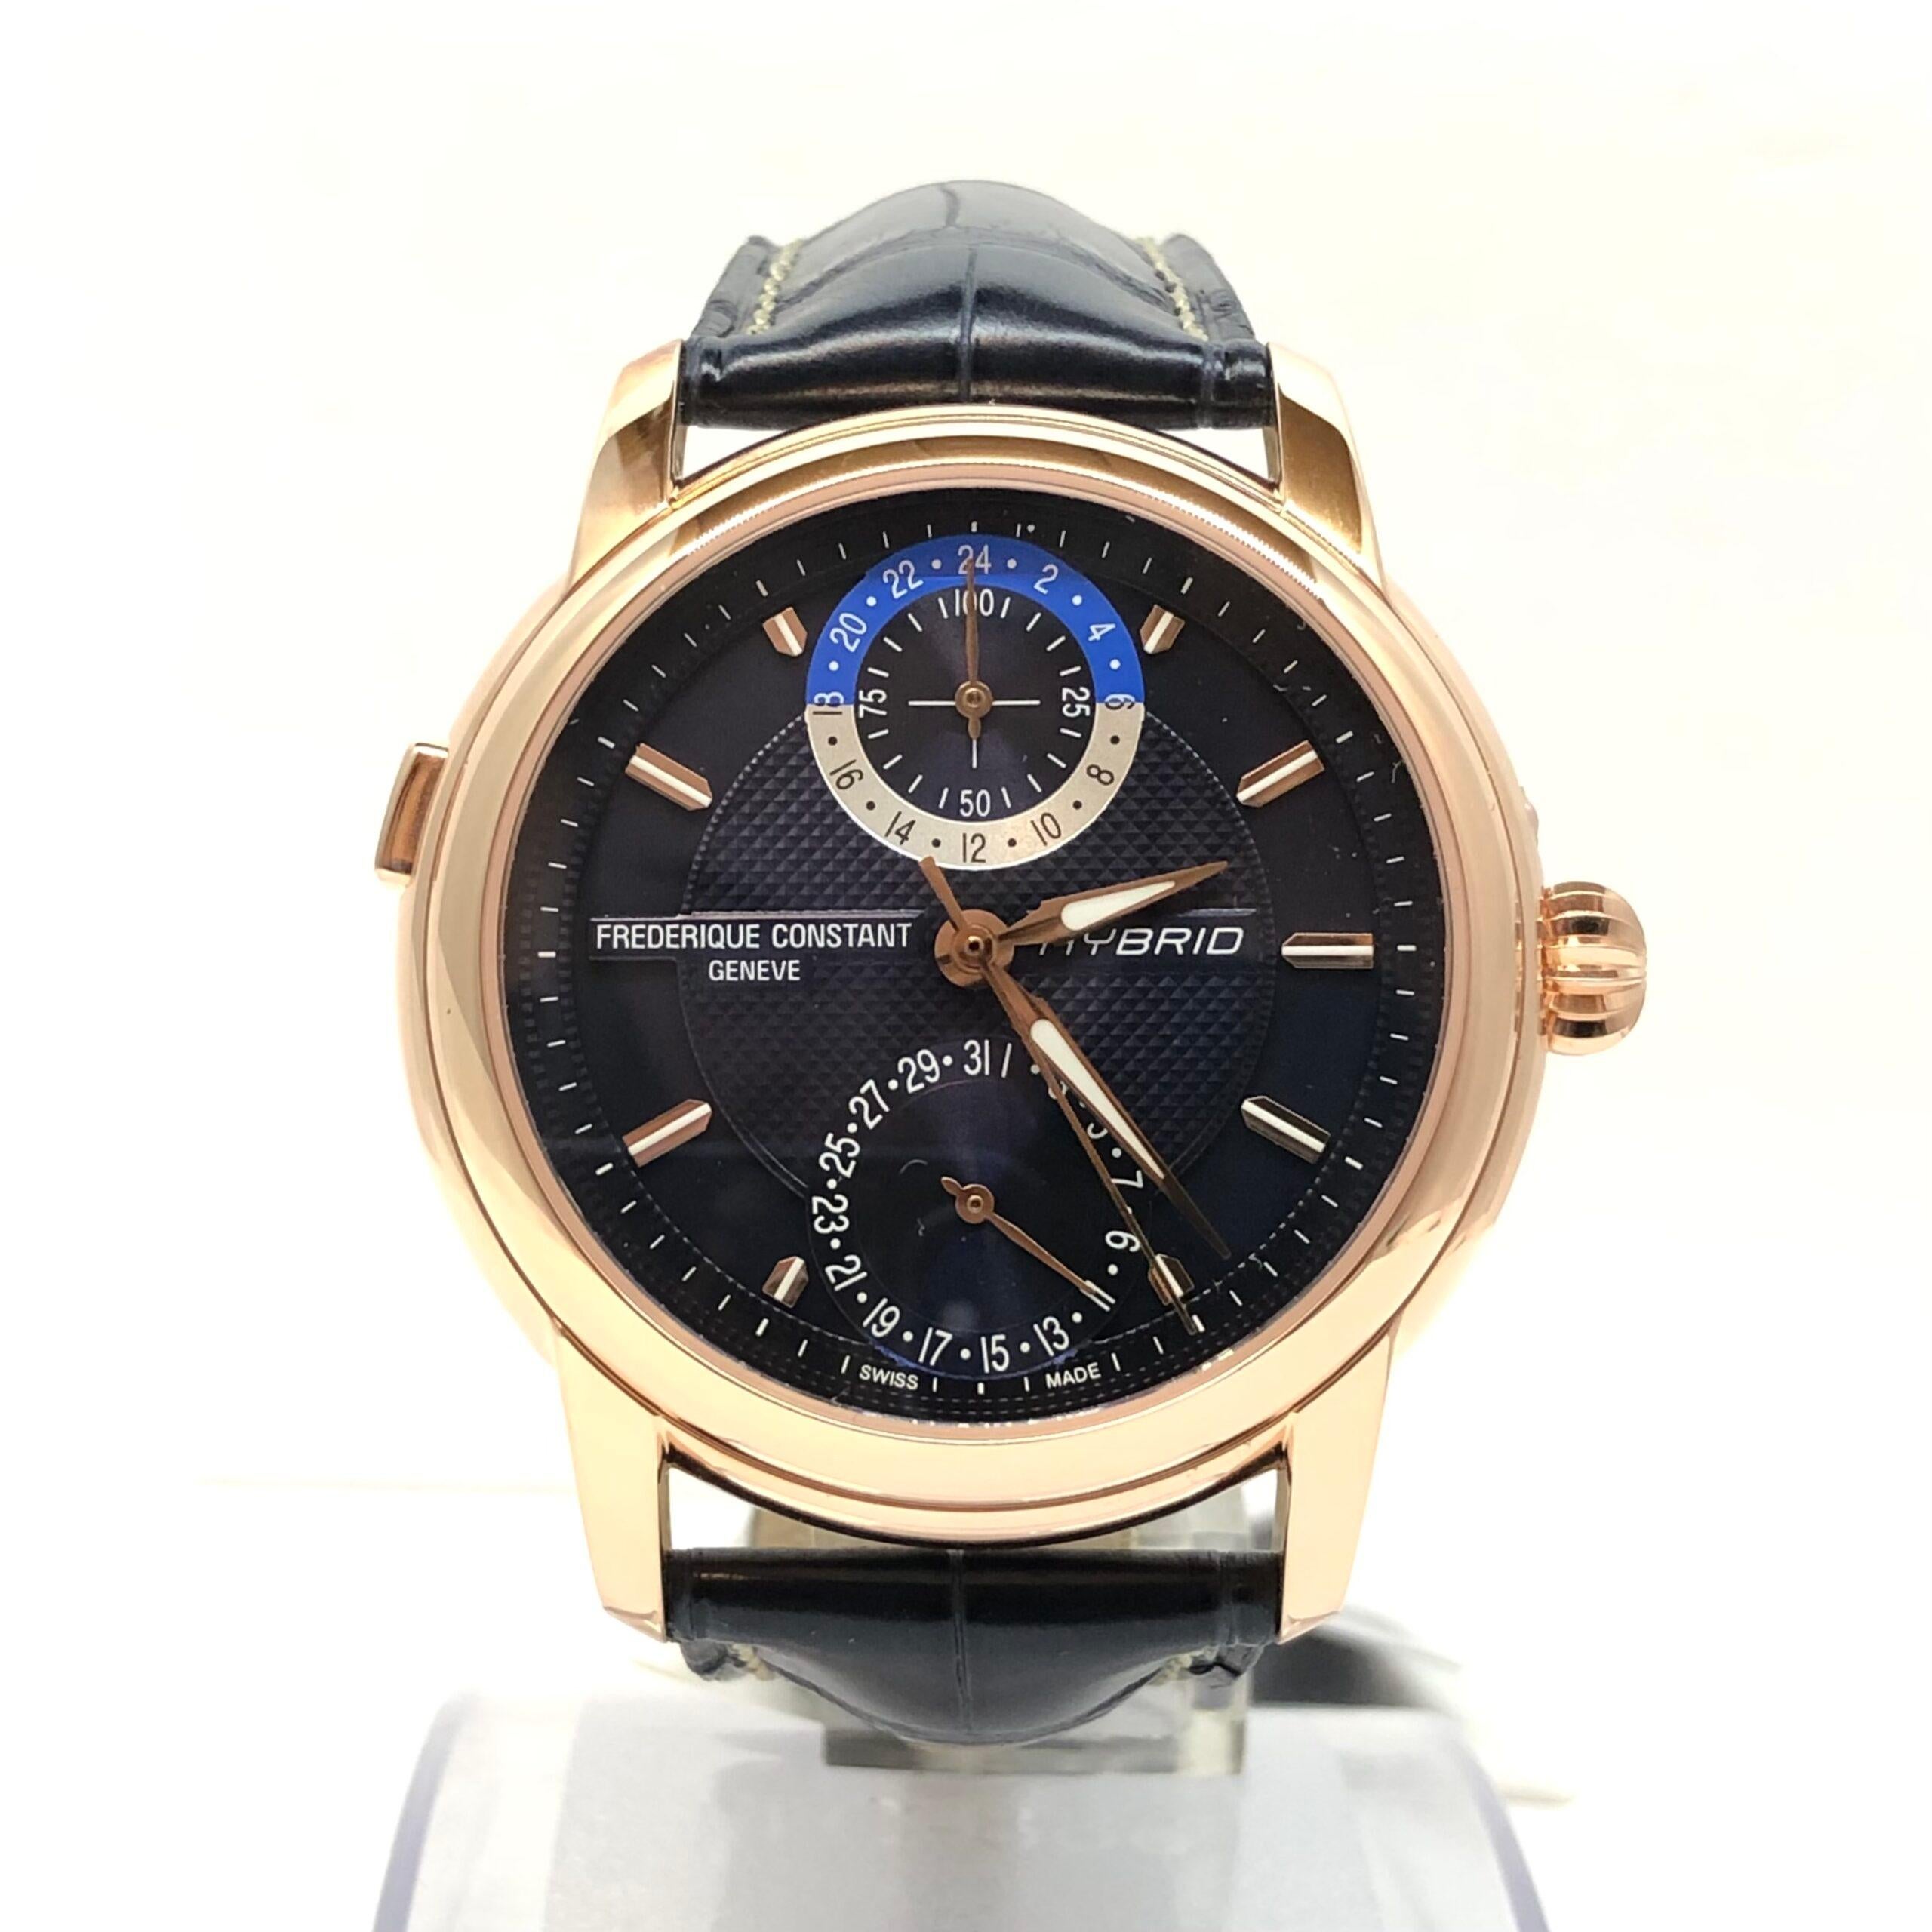 This Men’s watch has a 42 mm round rose gold-tone plated stainless steel case with fixed bezel. Blue dial and gold-tone hands & index hour markers. Date counter at 6 o’clock. Connected counter at 12 o’clock. Scratch-resistant sapphire crystal.